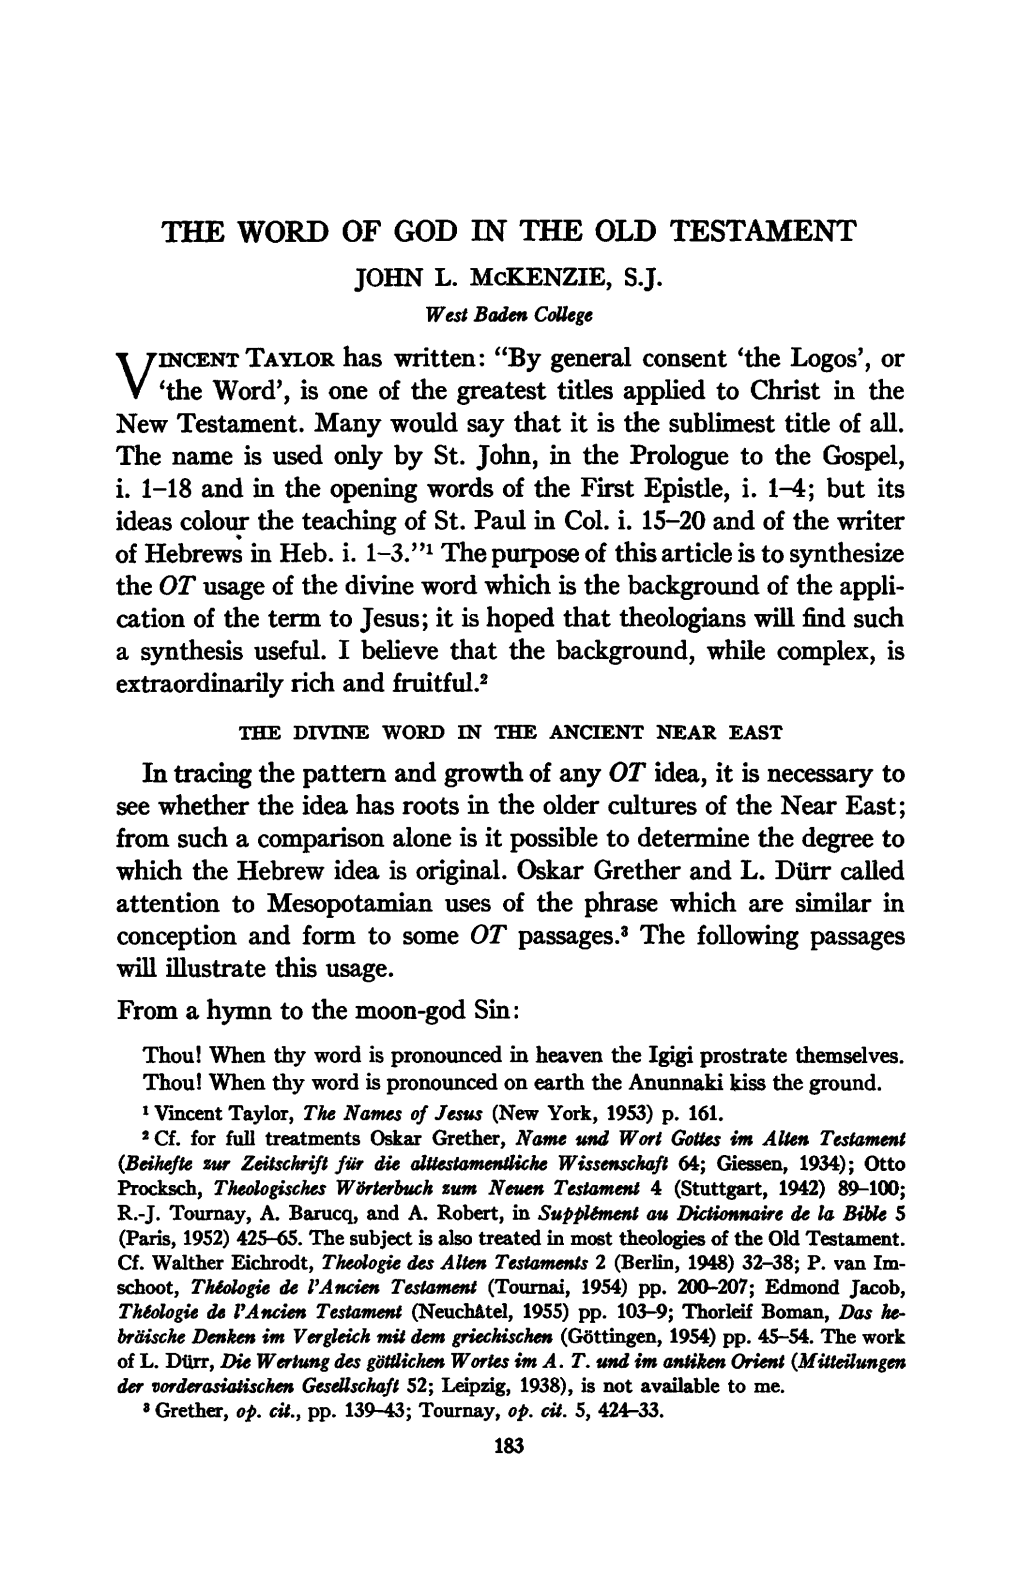 VINCENT TAYLOR Has Written: "By General Consent 'The Logos', Or